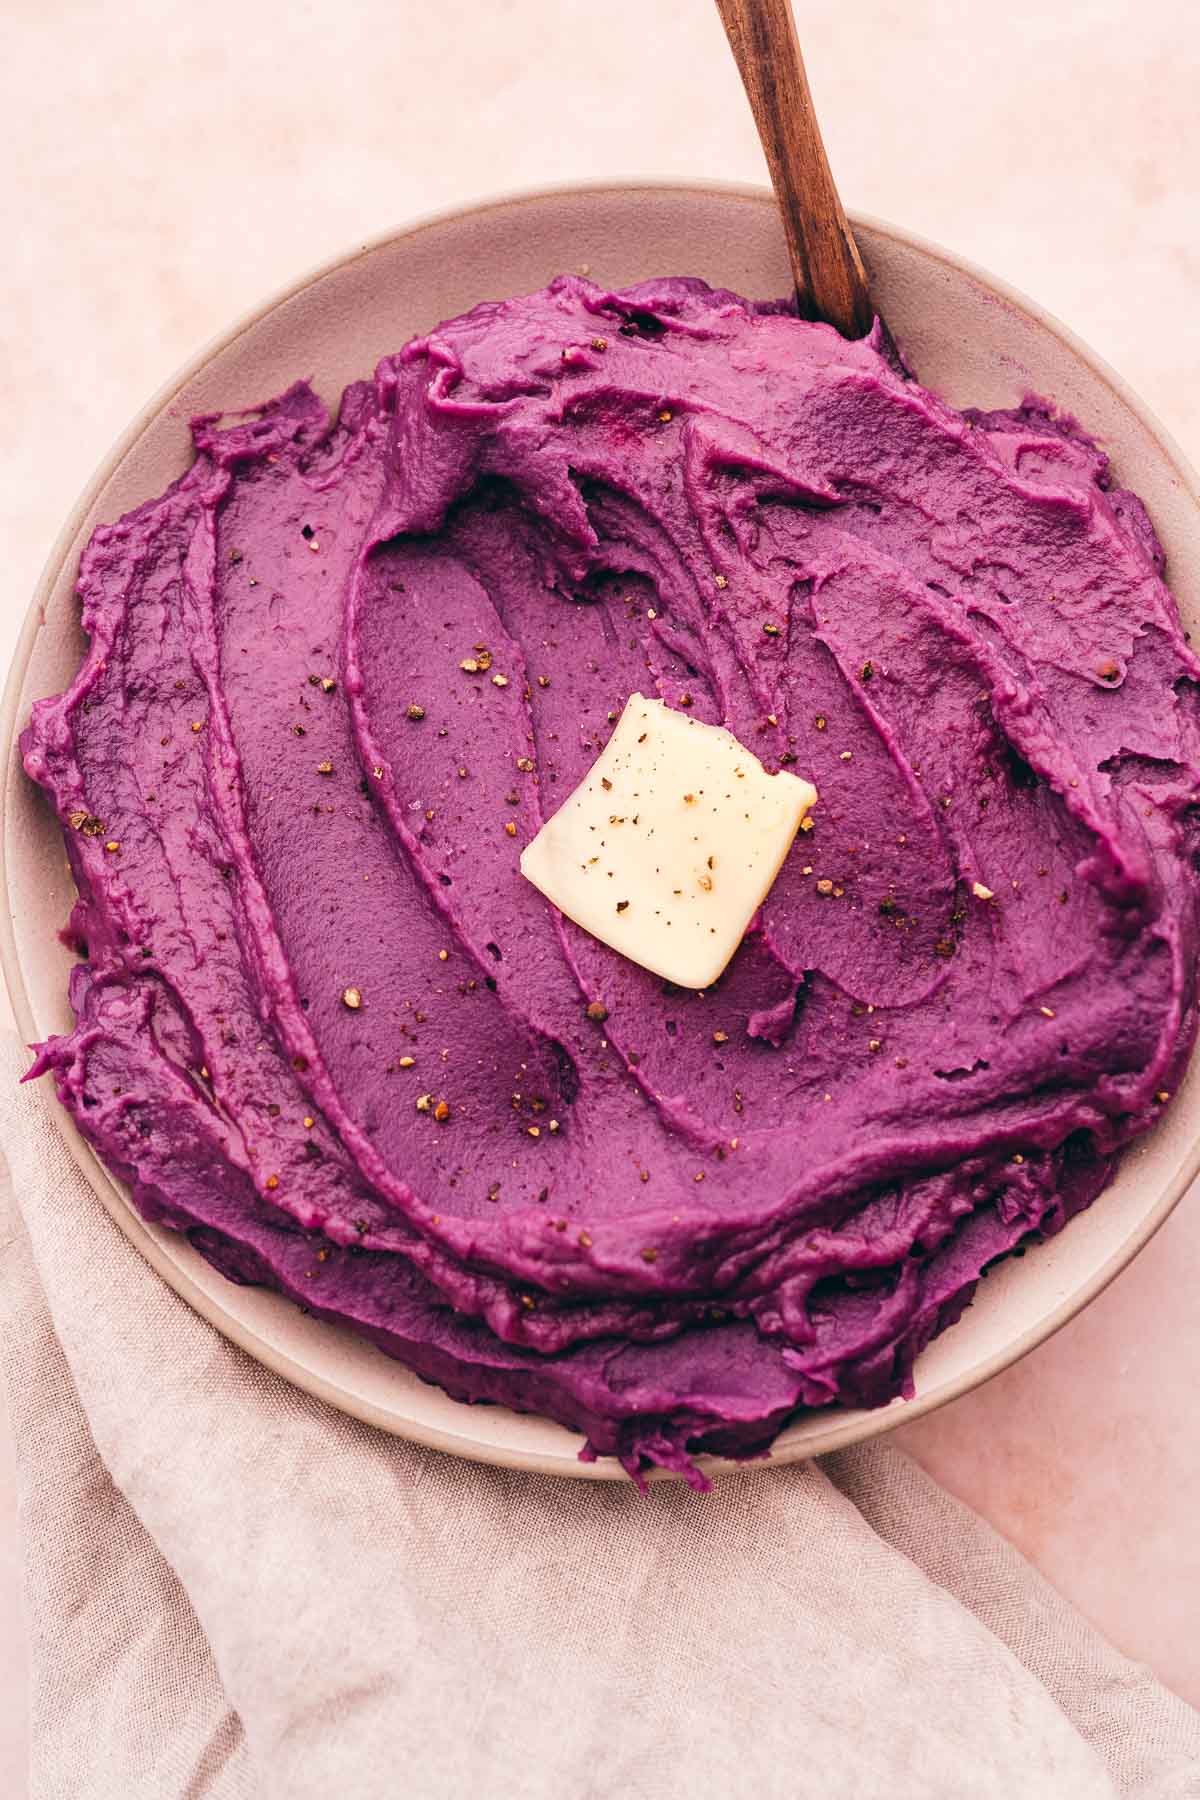 Purple mashed sweet potatoes on a plate with a wooden spoon.